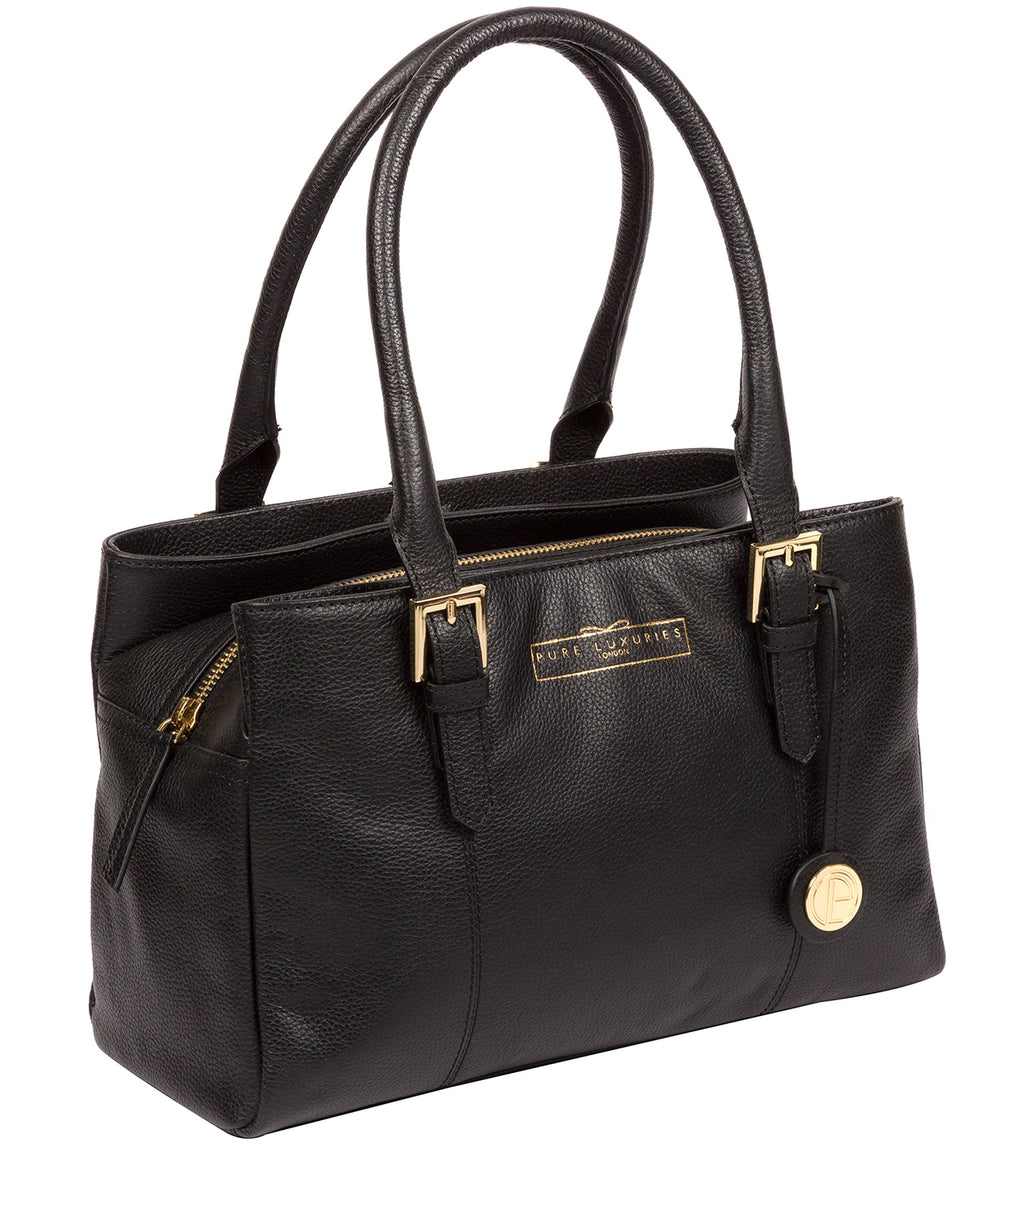 Black Leather Handbag 'Astley' by Pure Luxuries – Pure Luxuries London